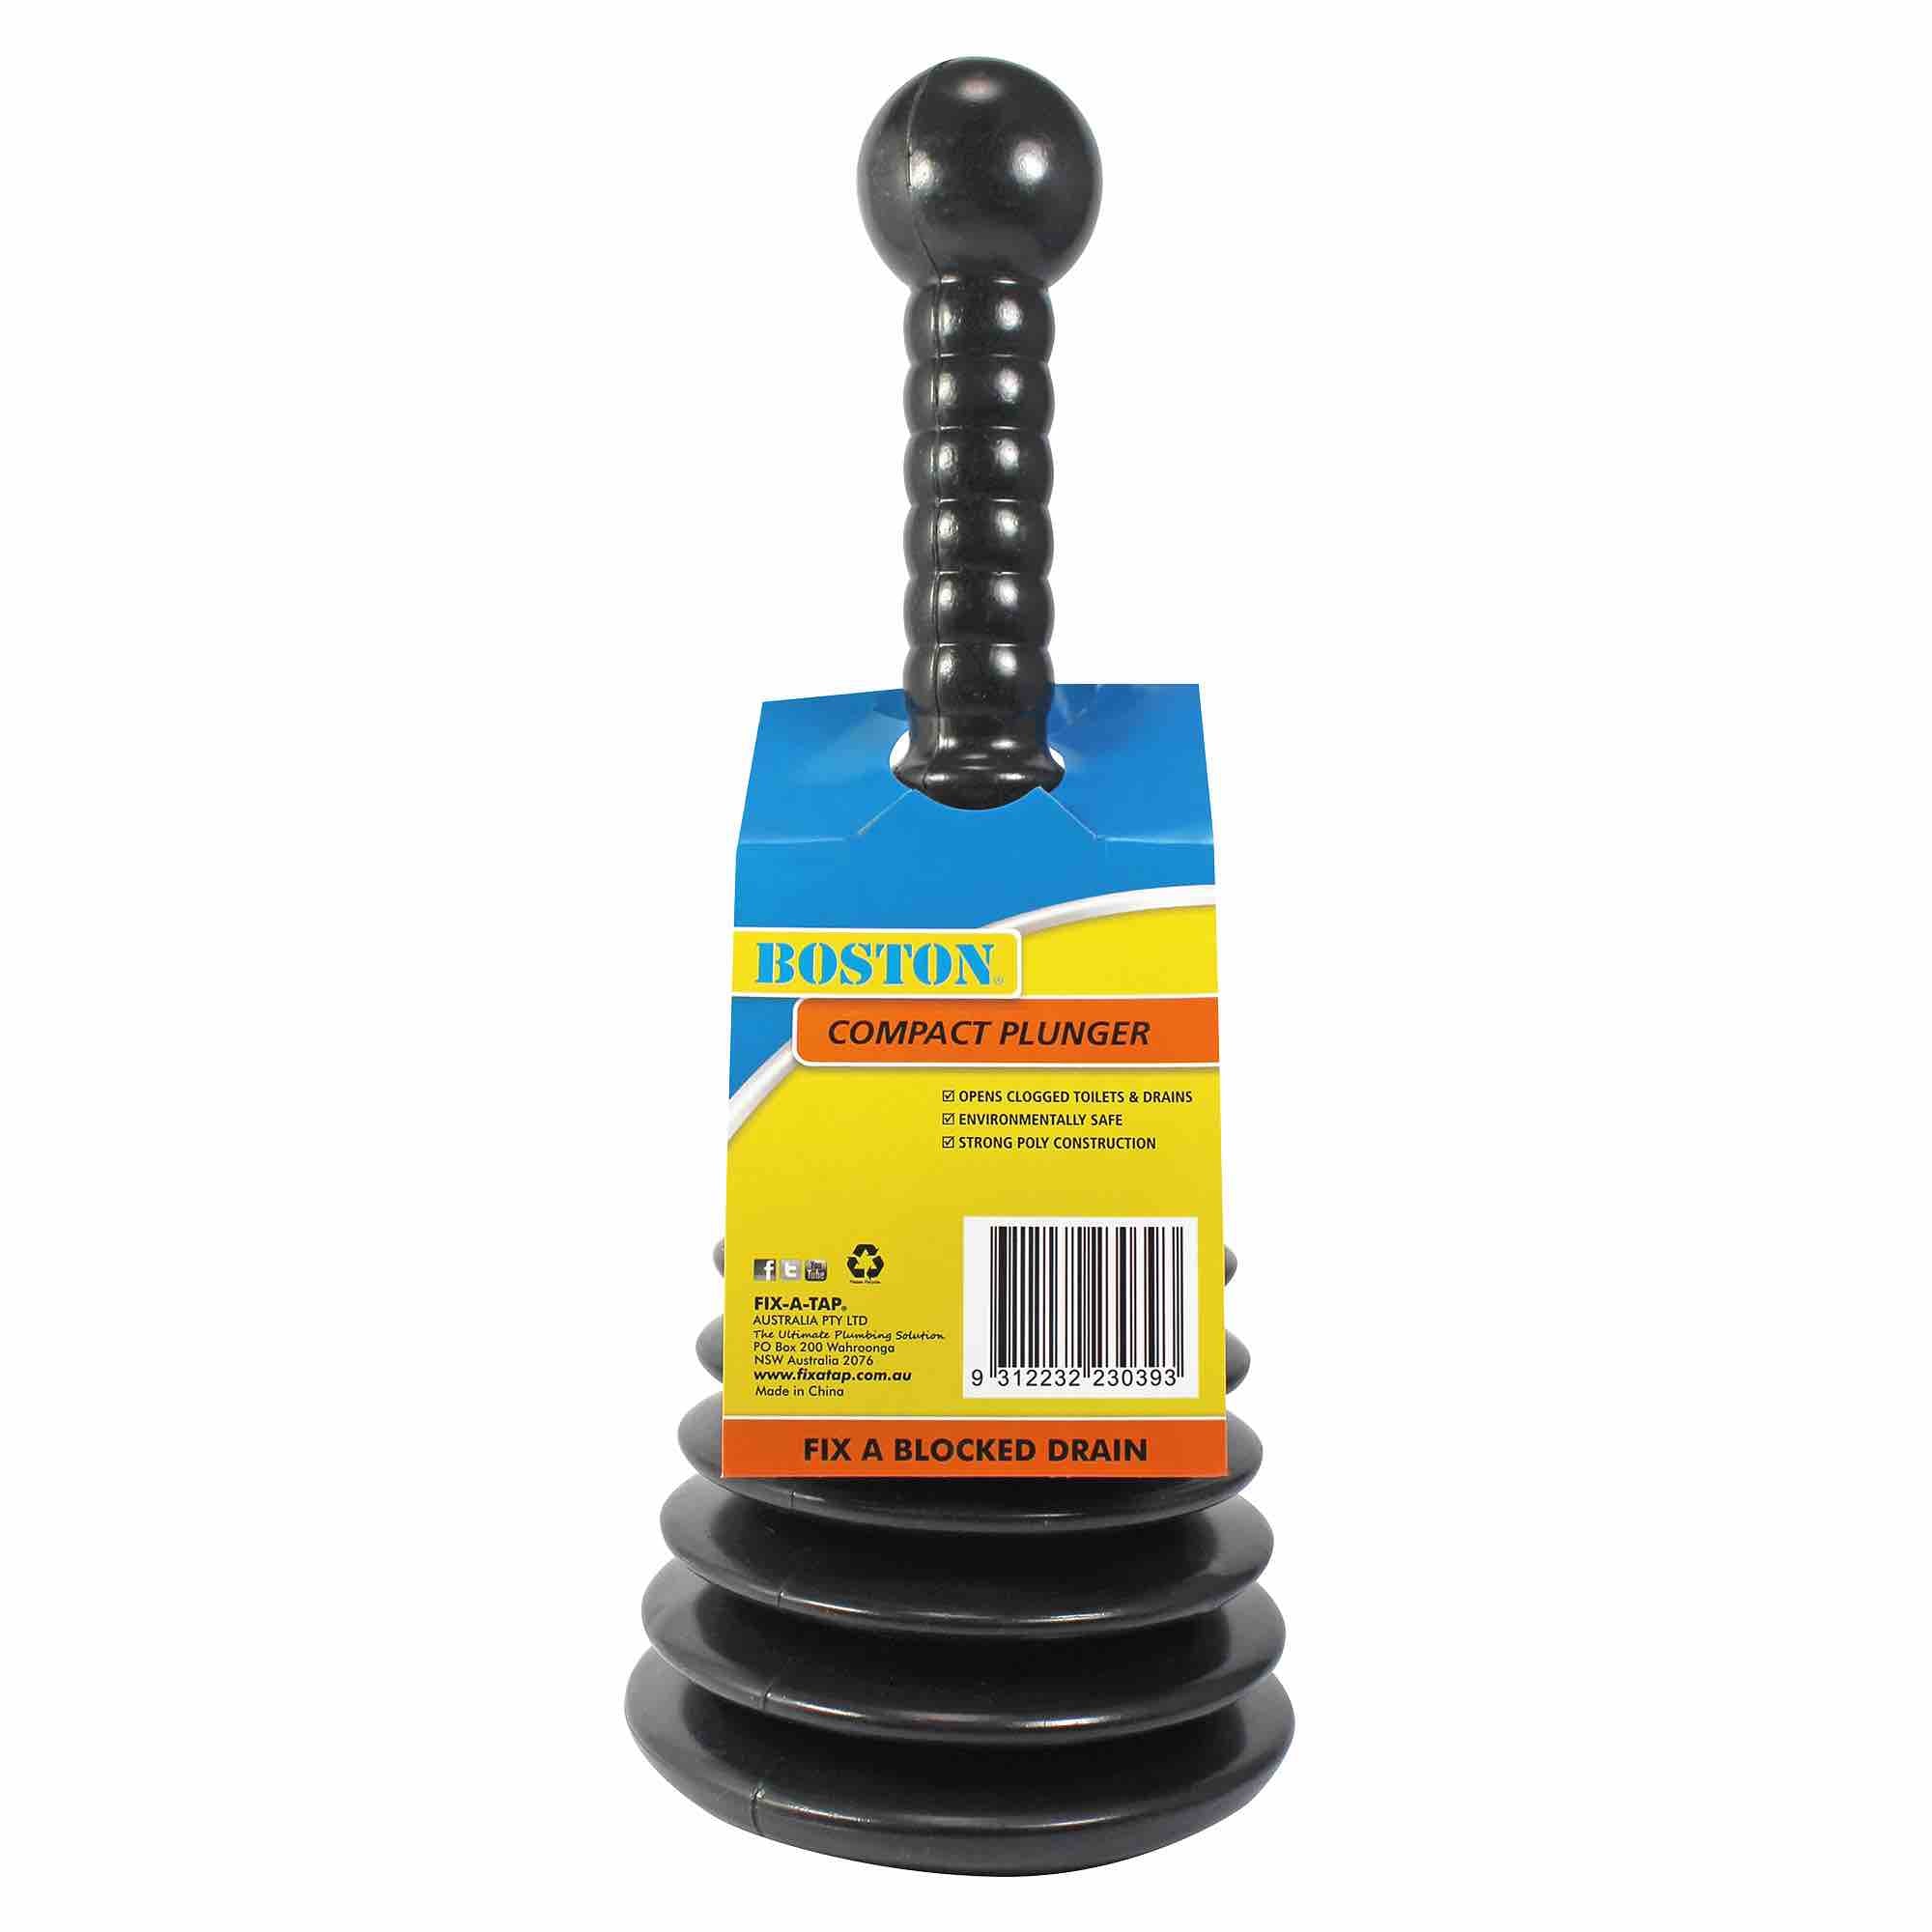 BOSTON Compact Plunger 230393 - Double Bay Hardware